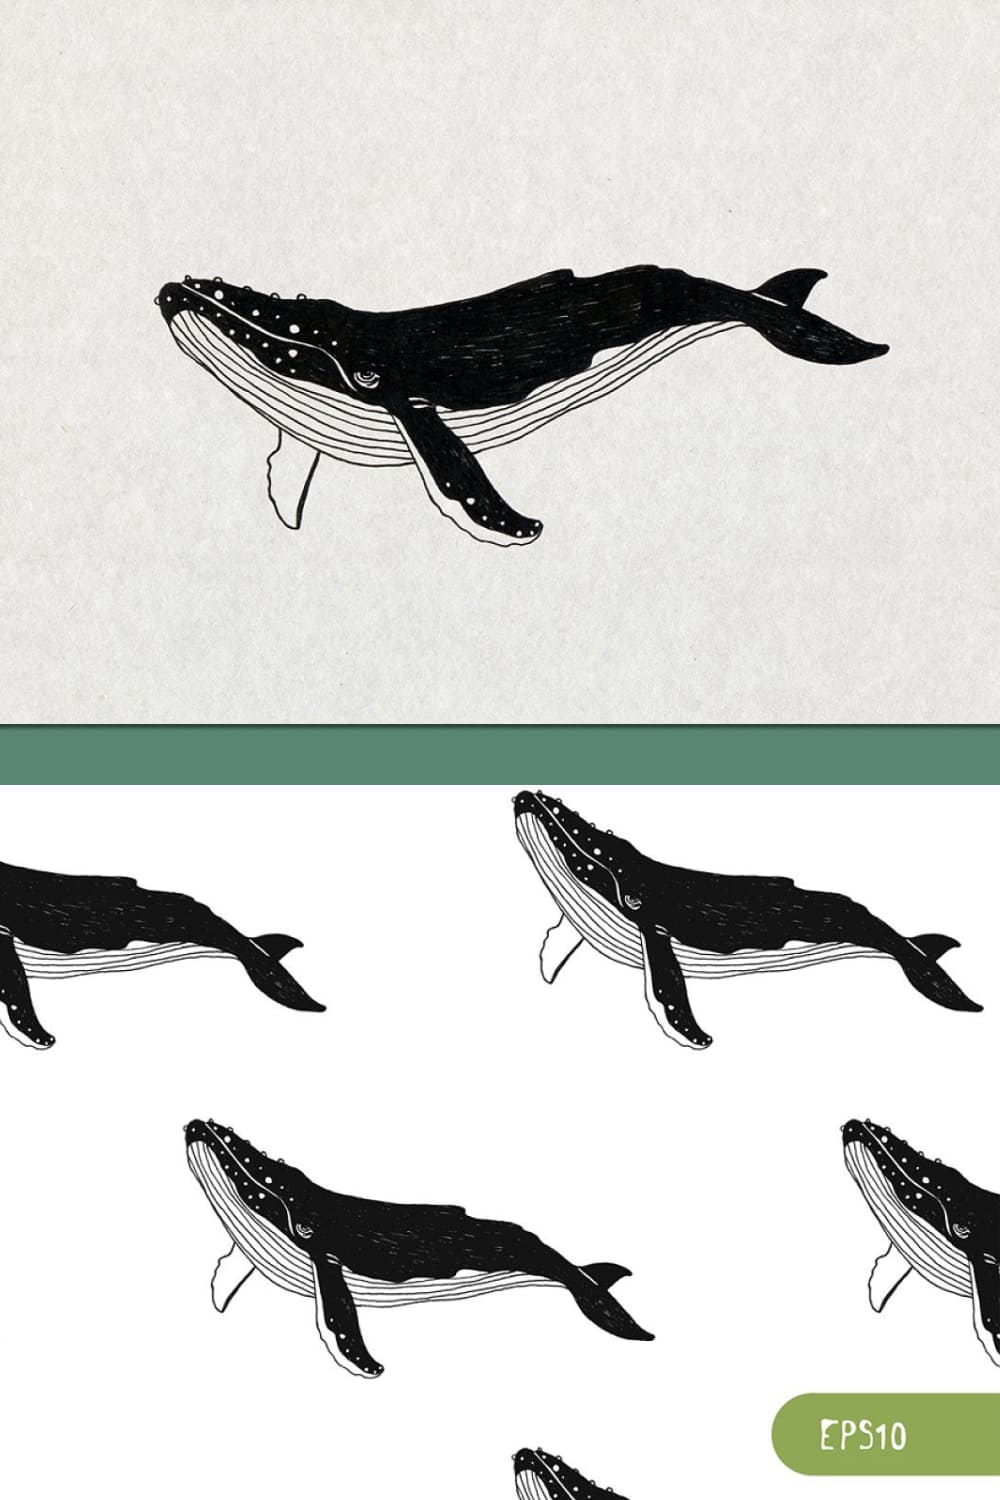 whale illustration and backgrounds for your design.